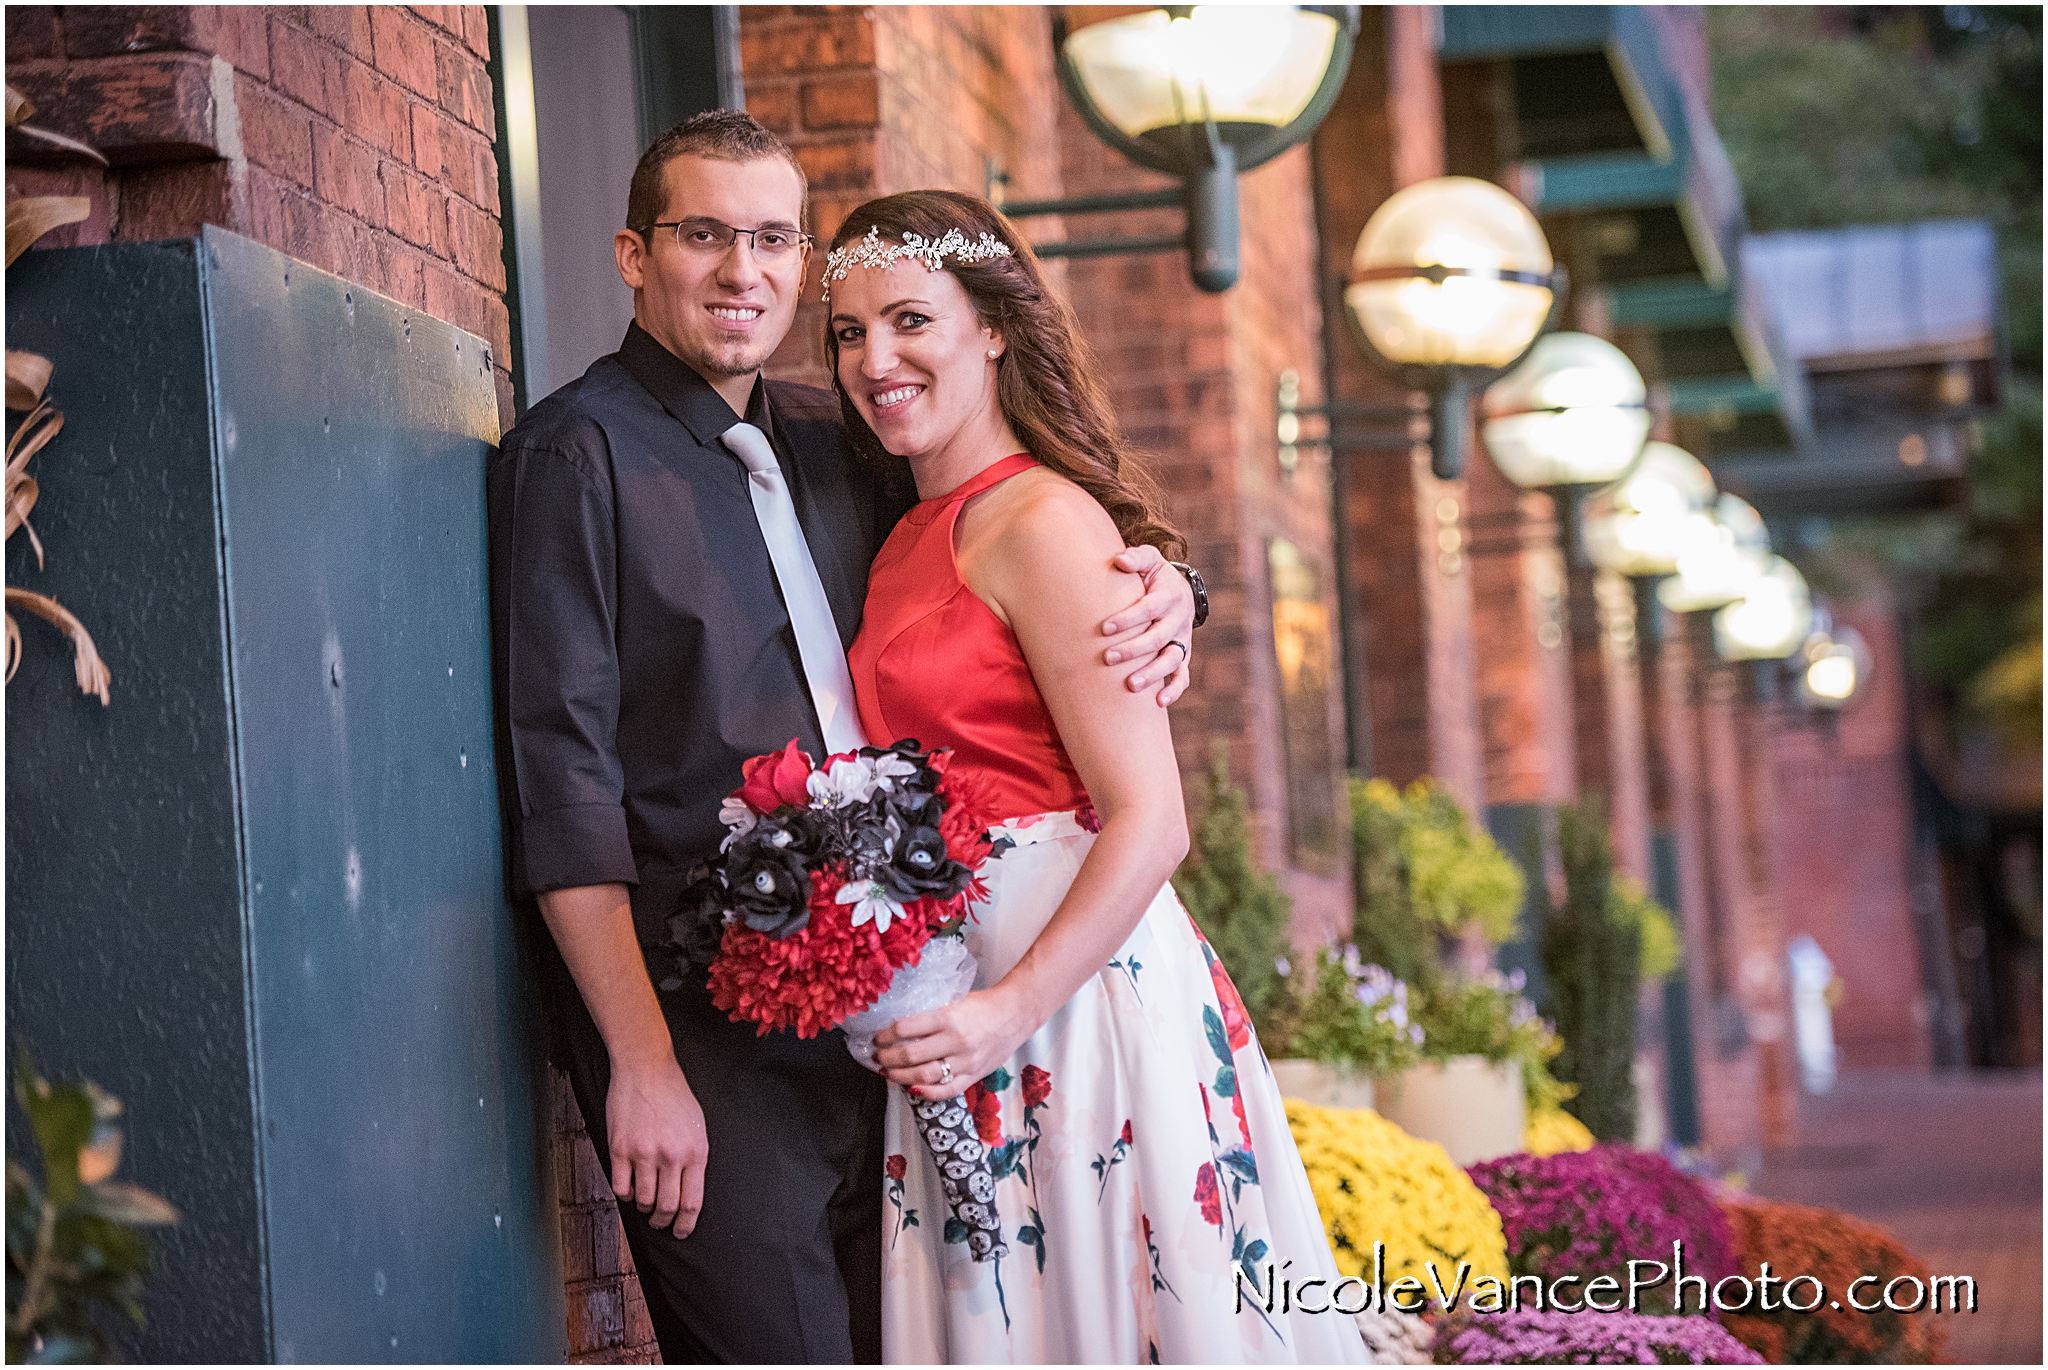 Bride and Groom Portraits at Bookbinders in Richmond, Virginia.